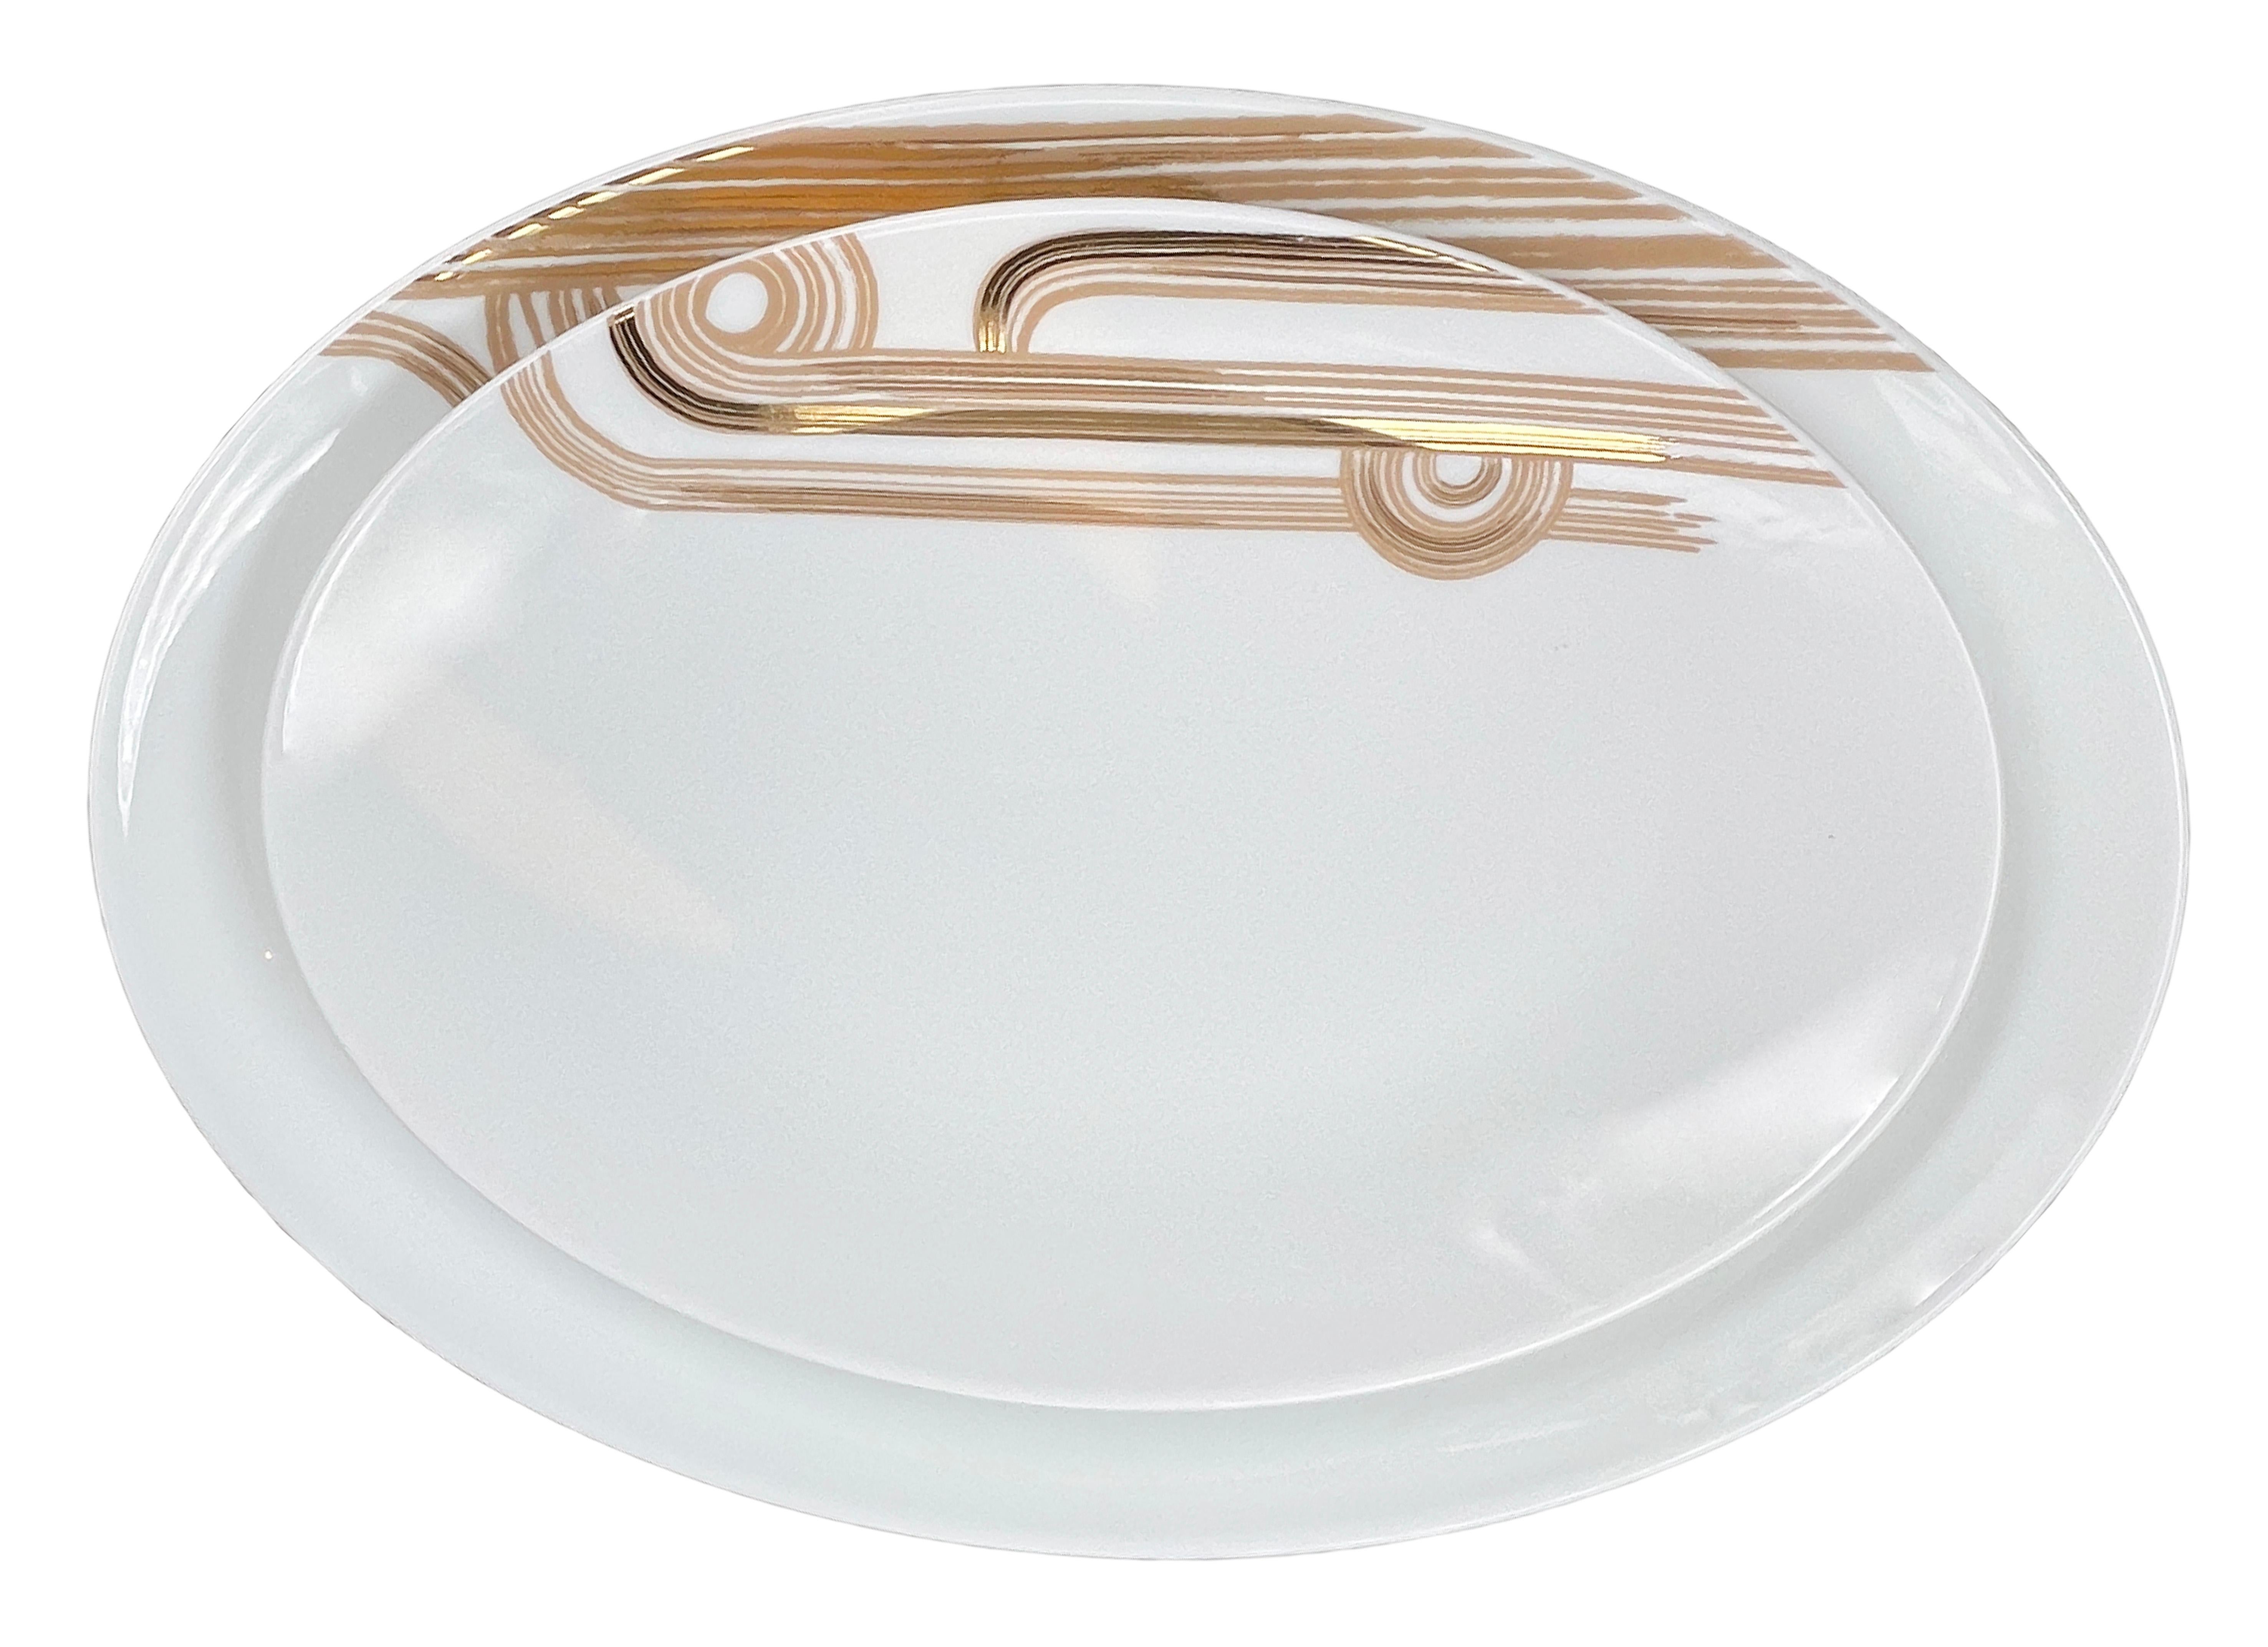 Modern Large Oval Serving Plate Art Déco Garden André Fu Living Tableware New For Sale